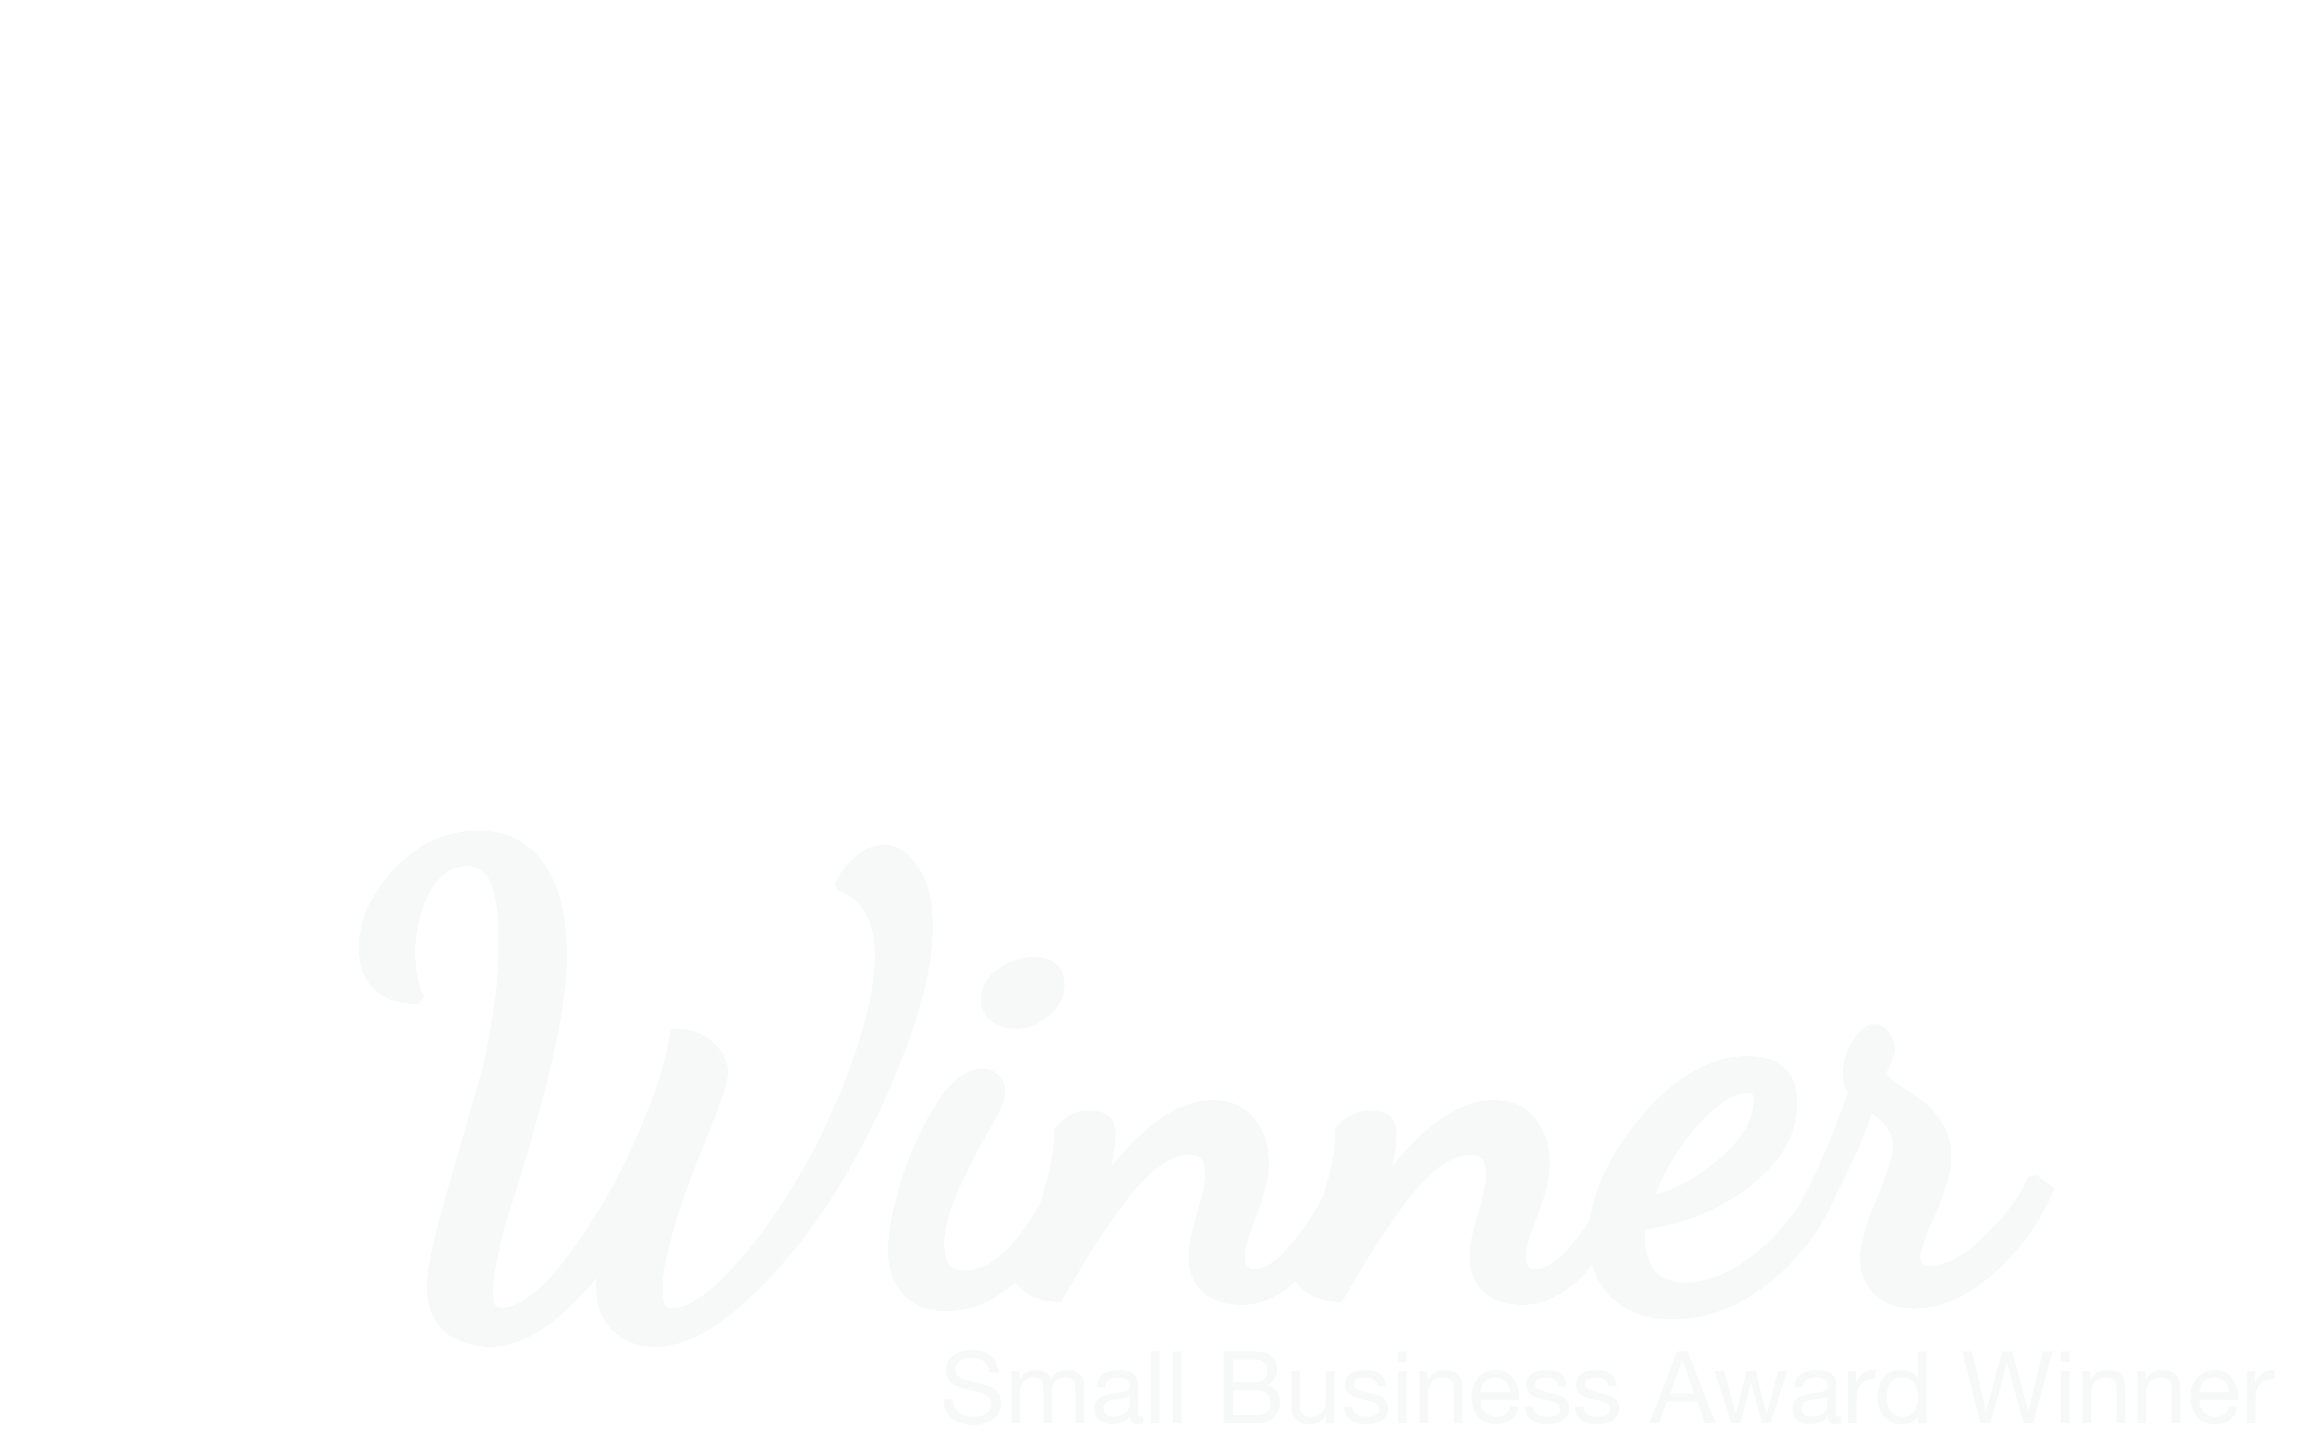 Belair Engineering is your Prince George's County Small Business Of The Year Award Winner!